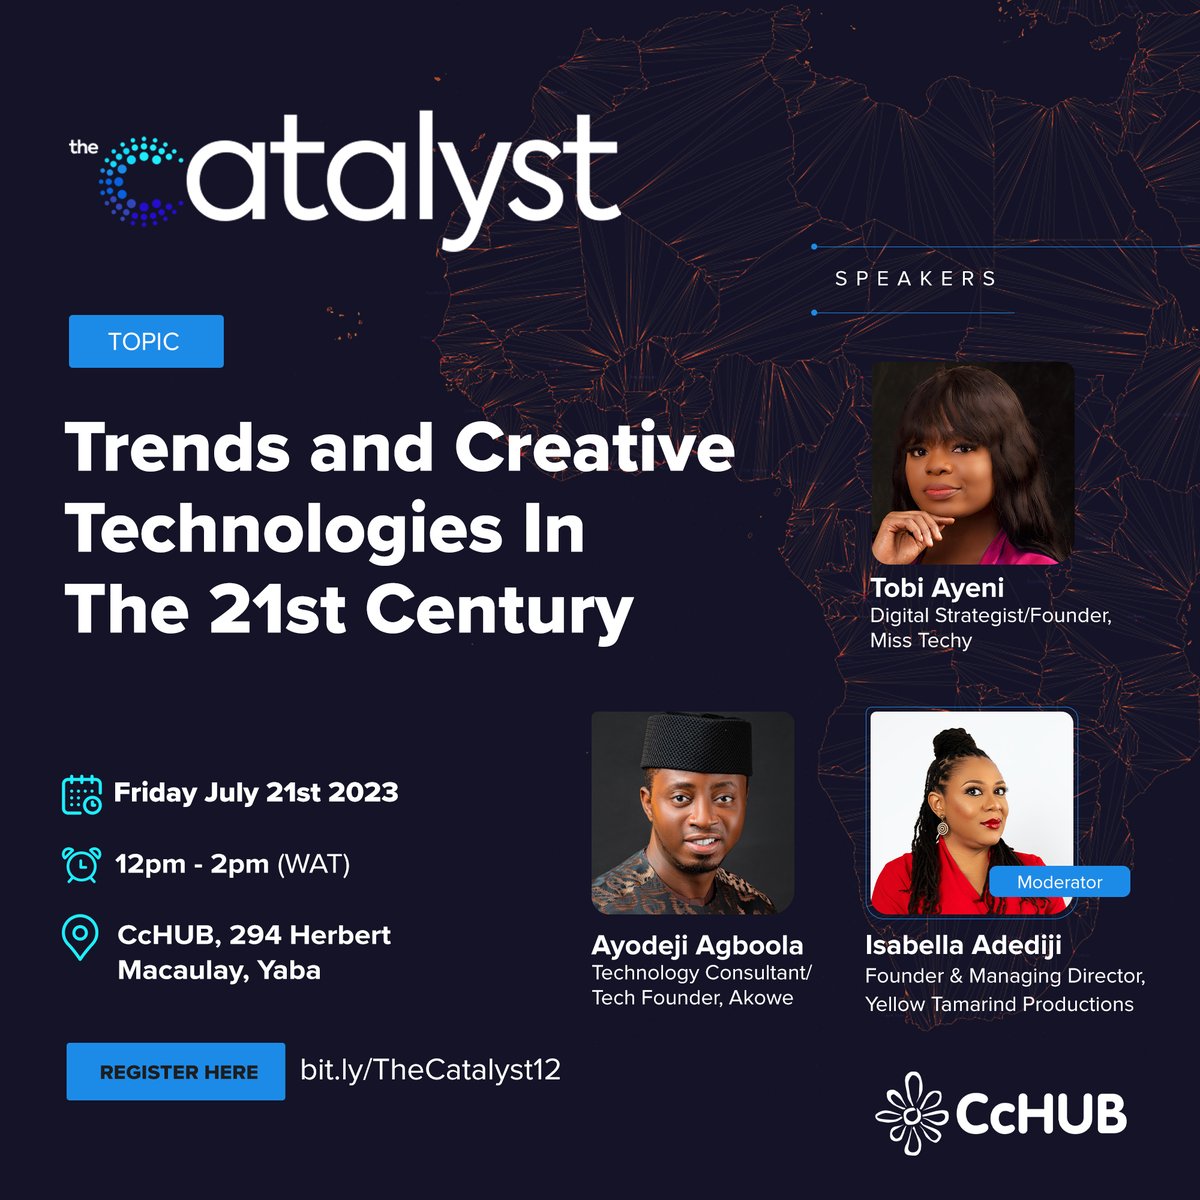 The Catalyst 10.2 is back this month featuring @MissTechyNG, @mededot, and @IsabellaAdediji.🎊 You can’t afford to miss out on this incredible fireside session with two industry #experts discussing how the fusion of #creativity and #technology in the 21st century has...👇 1/3🧵